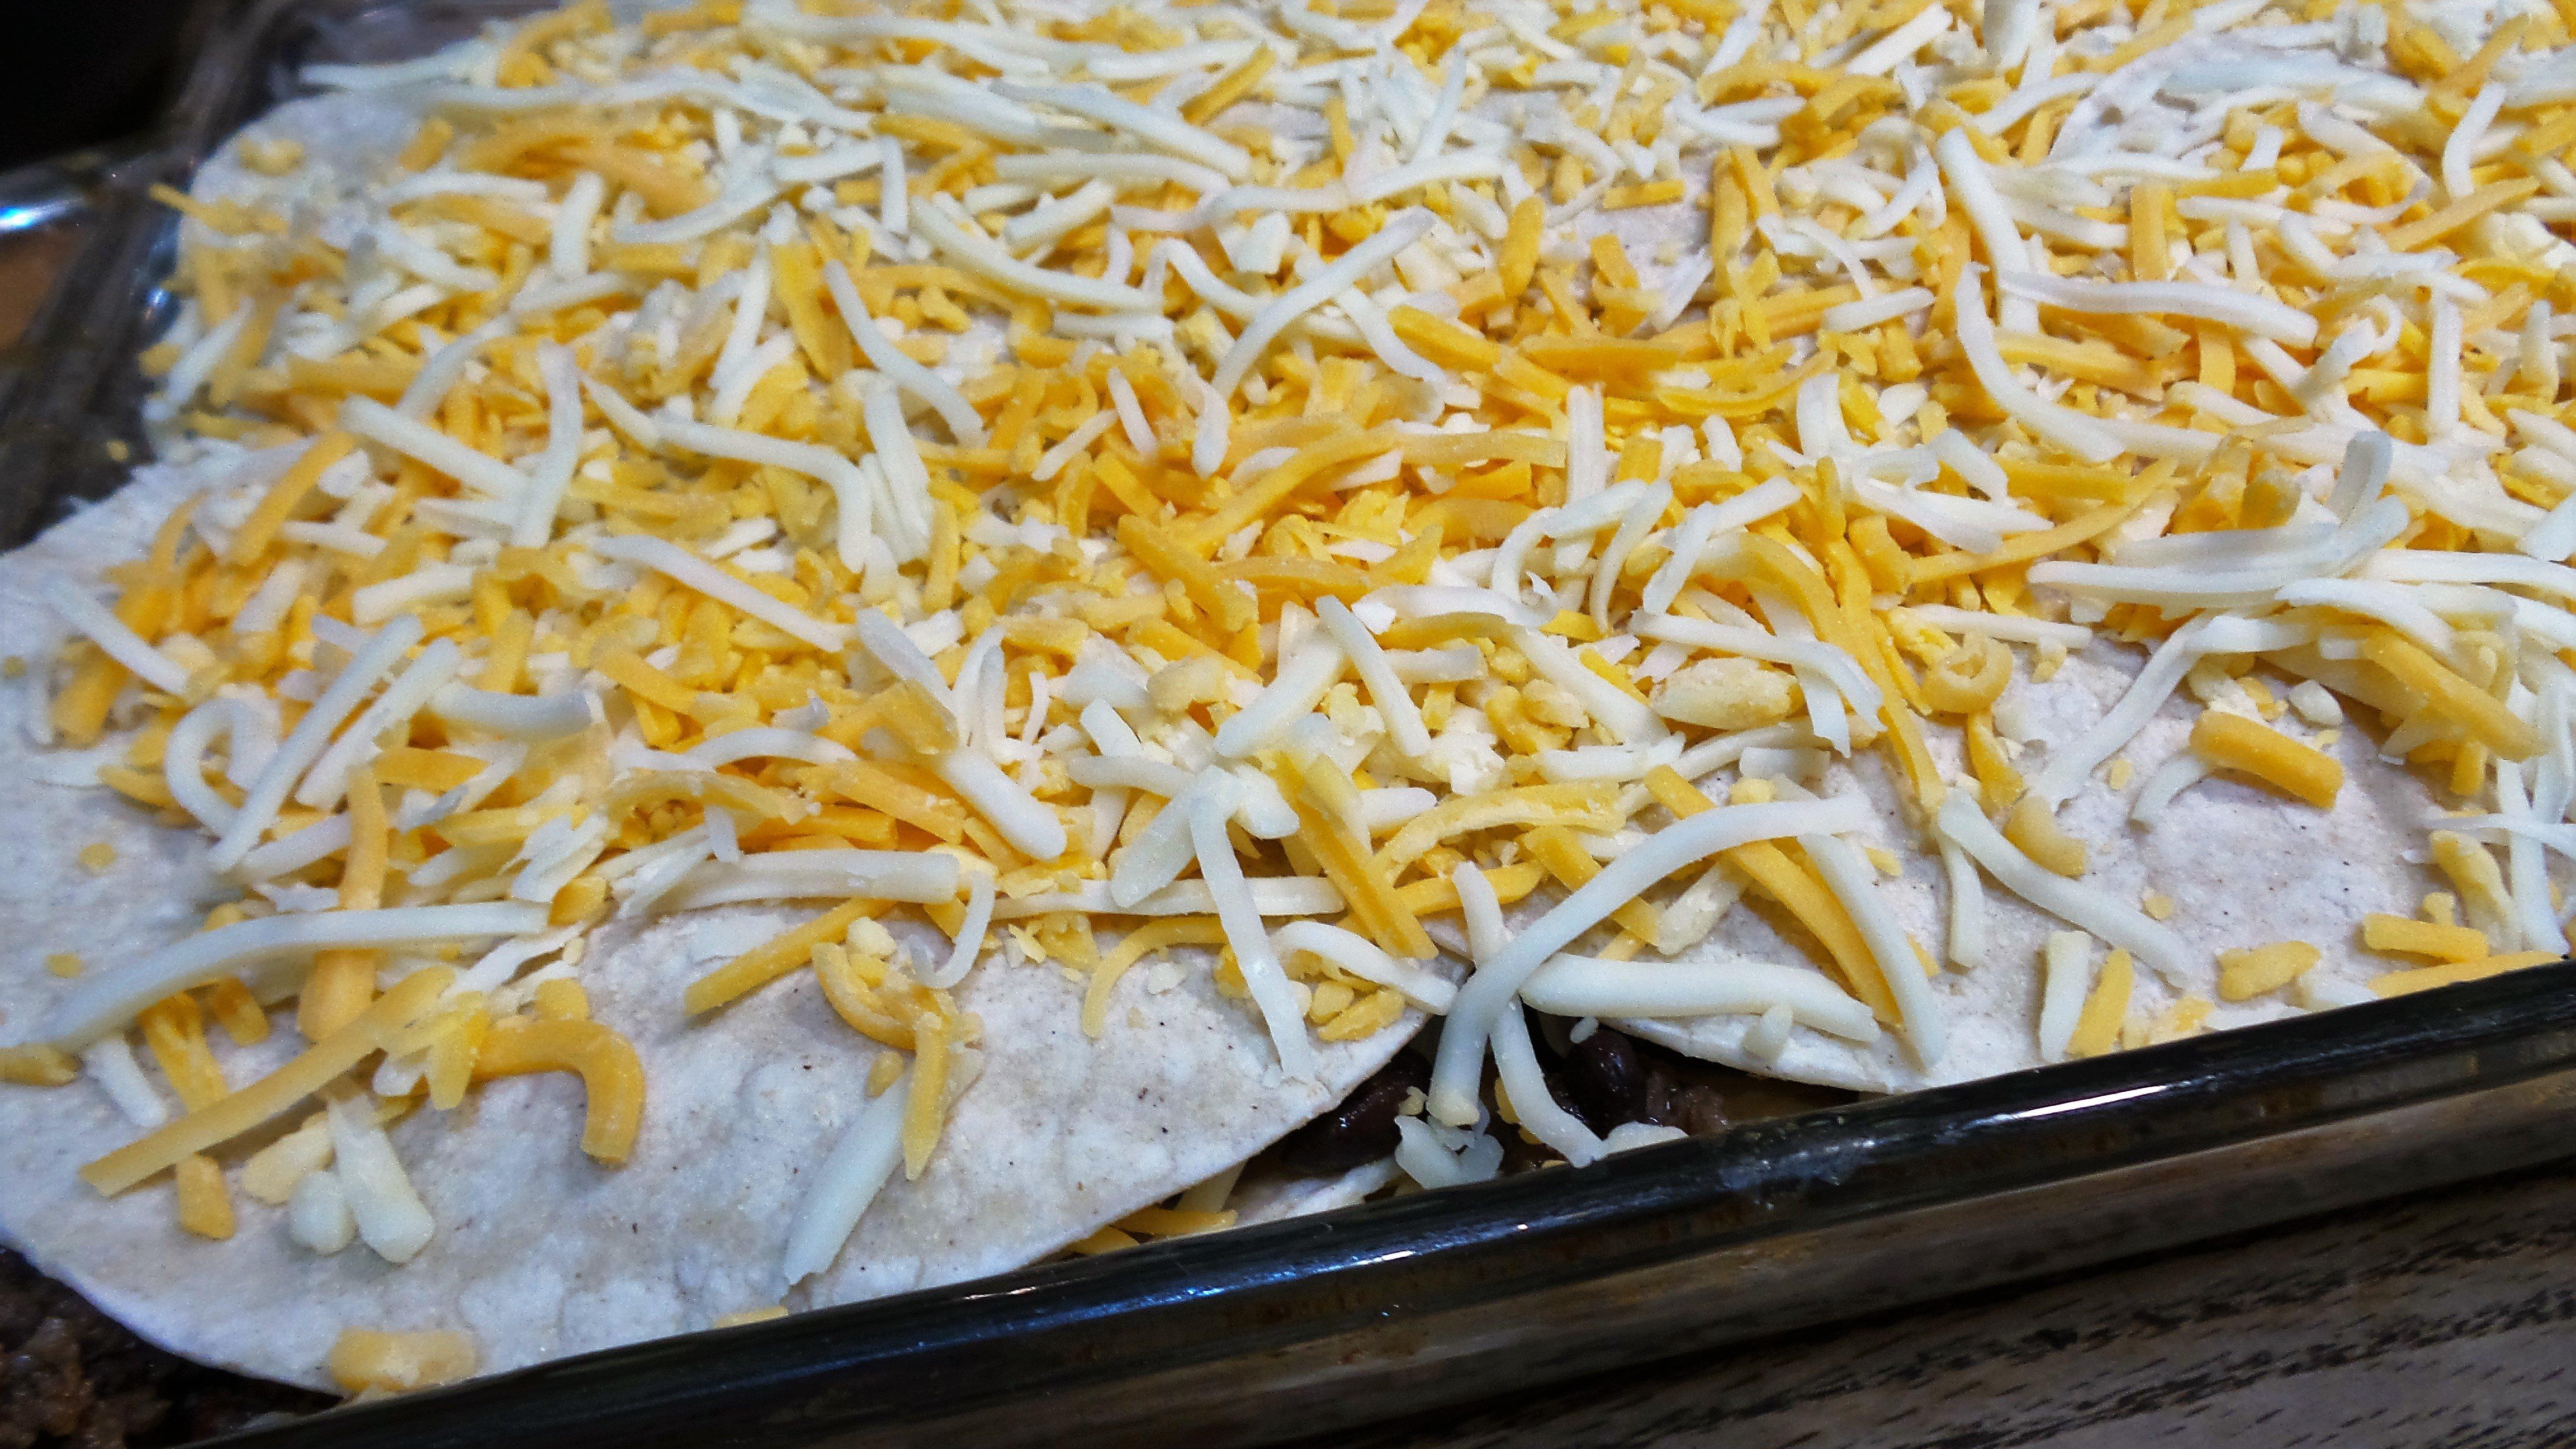 Layer tortillas, meat and cheese till dish is full. Finish with cheese.